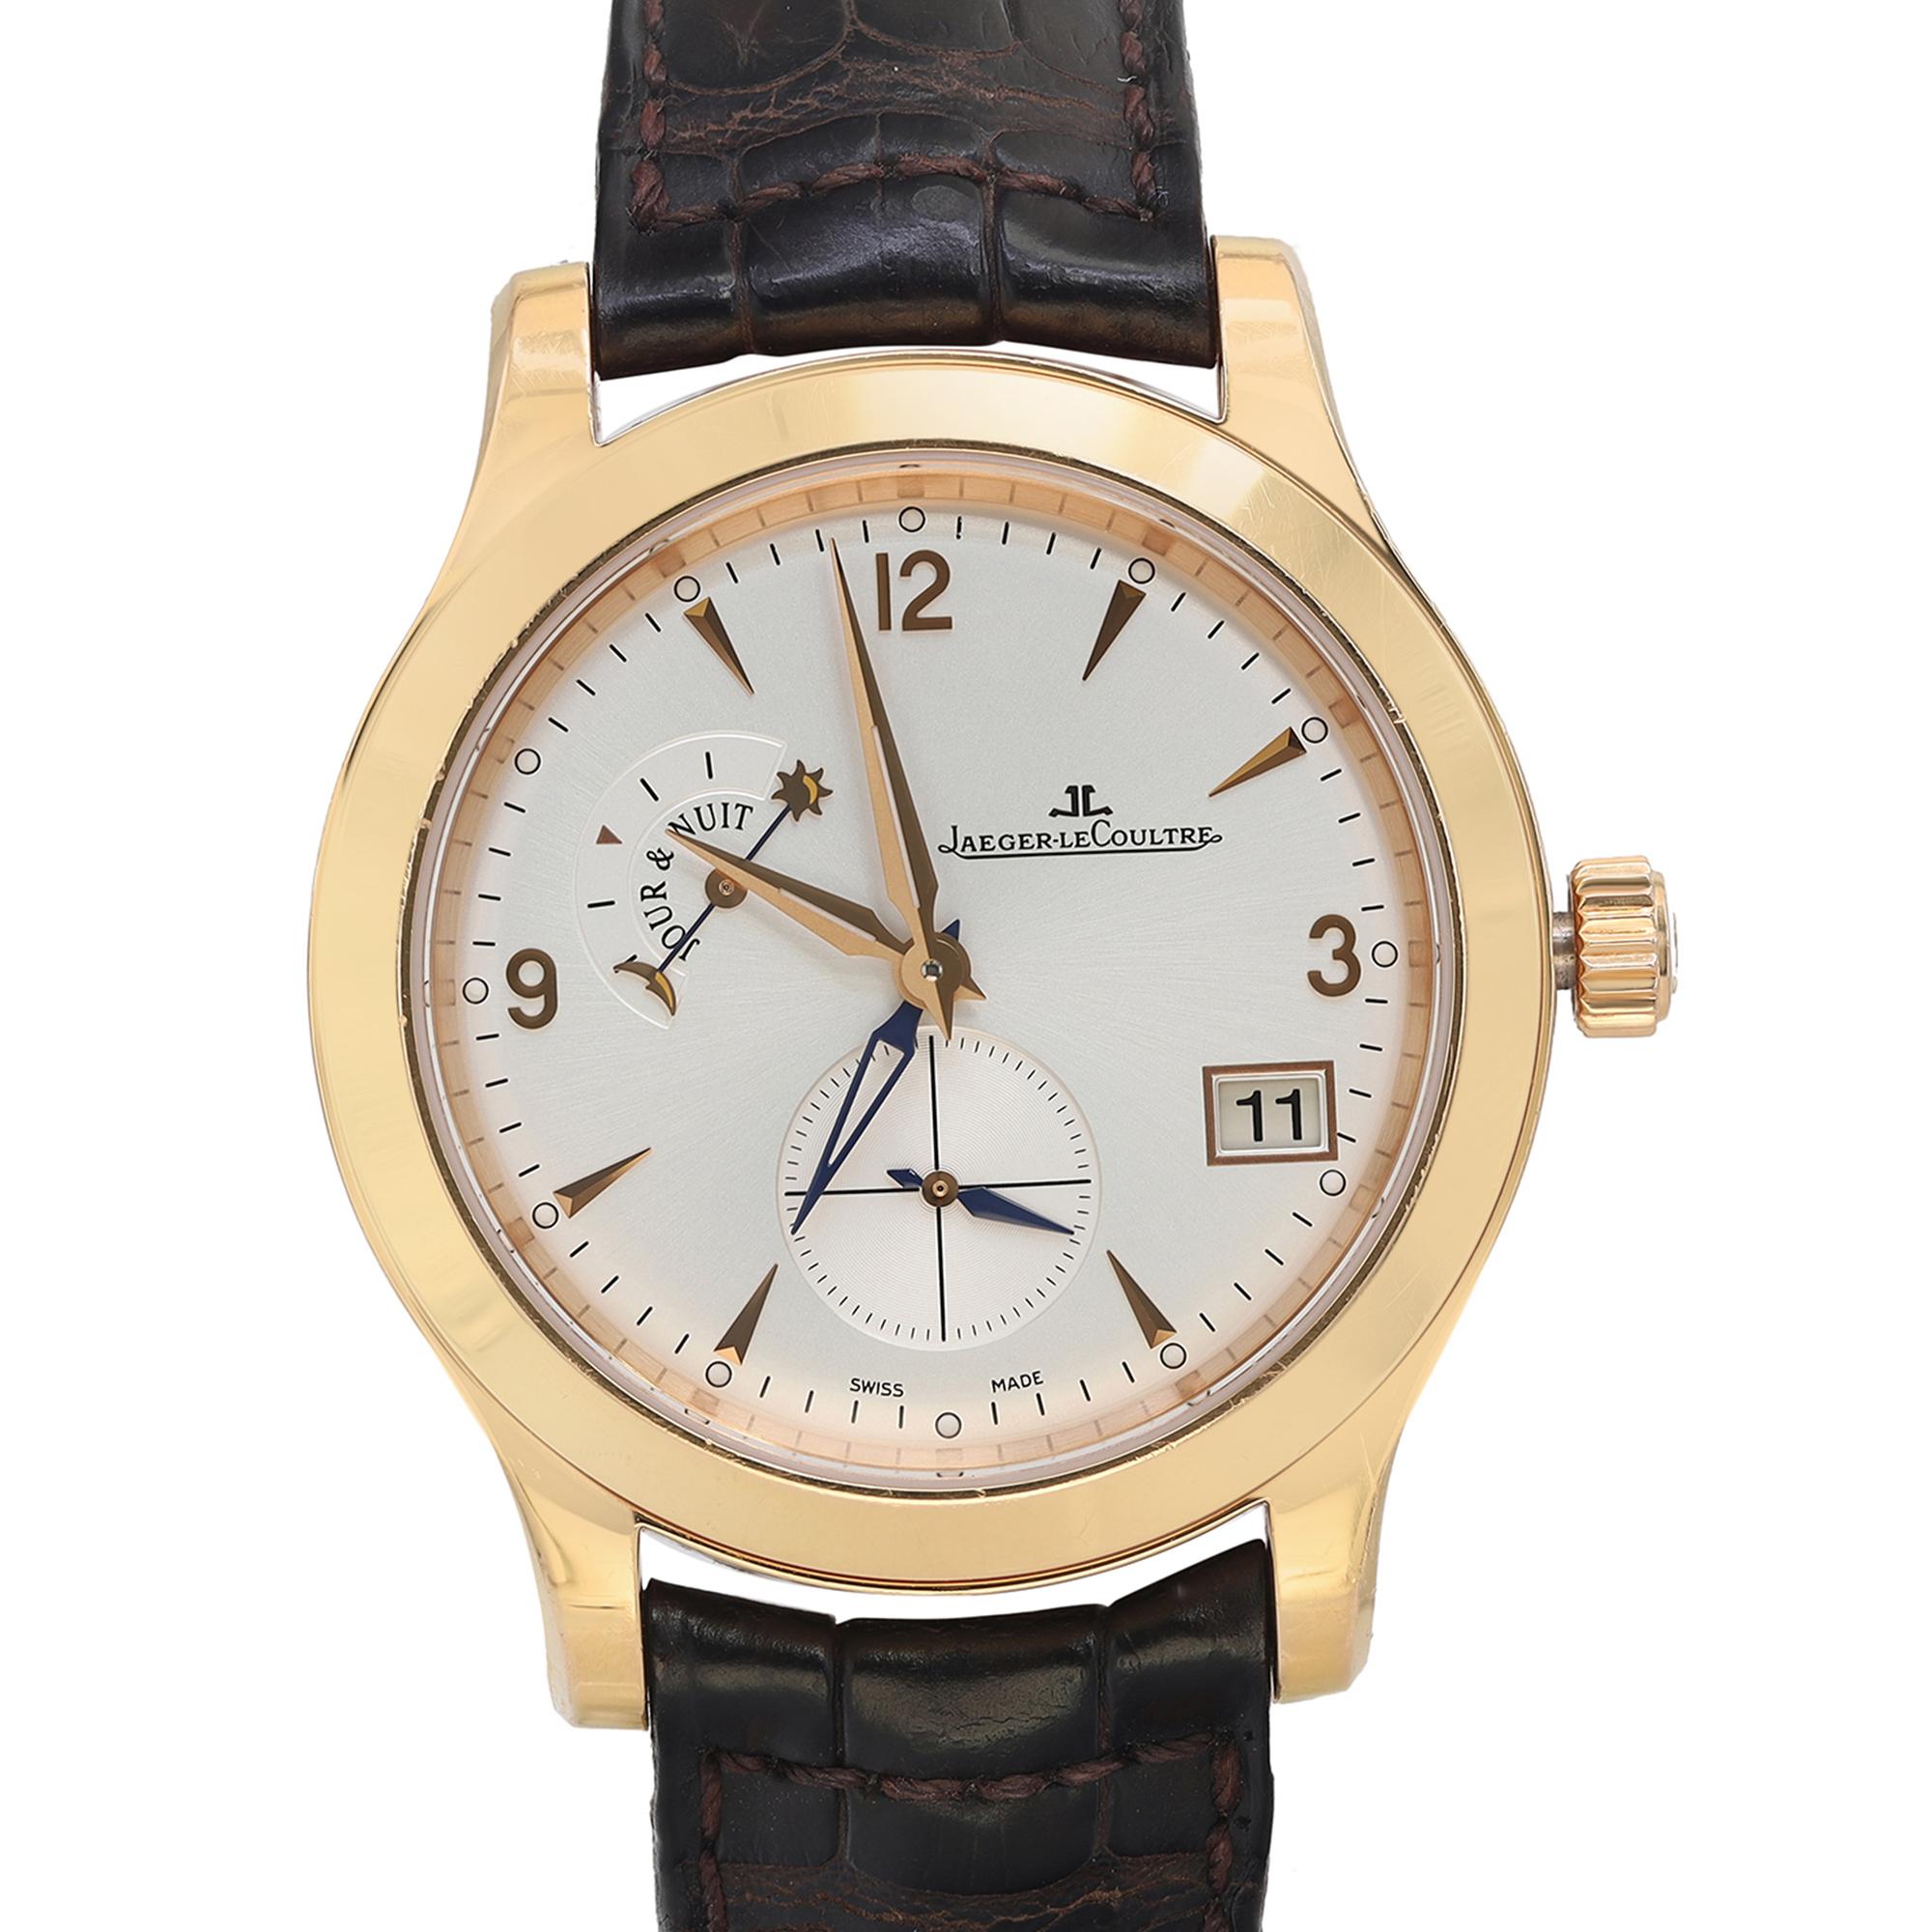 Pre-owned Jaeger-LeCoultre Master Control Hometime 40mm 18k Rose Gold Silver Dial Automatic Men's Watch Q1622420. Visible wear signs inner side of the band. This Beautiful Timepiece Features: Round 18k Rose Gold Case With Brown Leather Strap. Silver